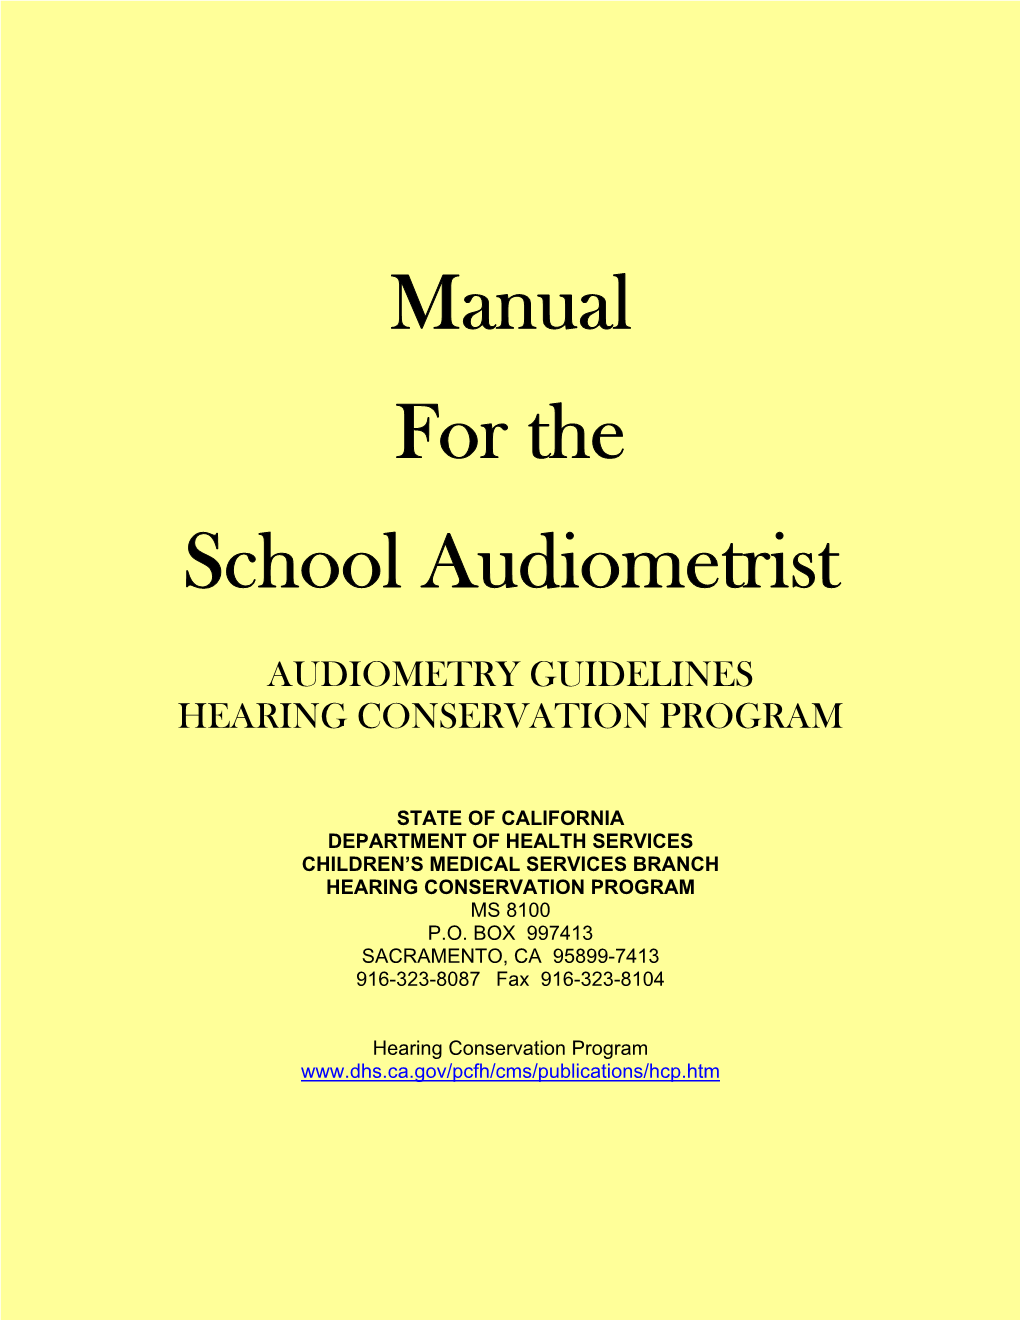 Manual for the School Audiometrist